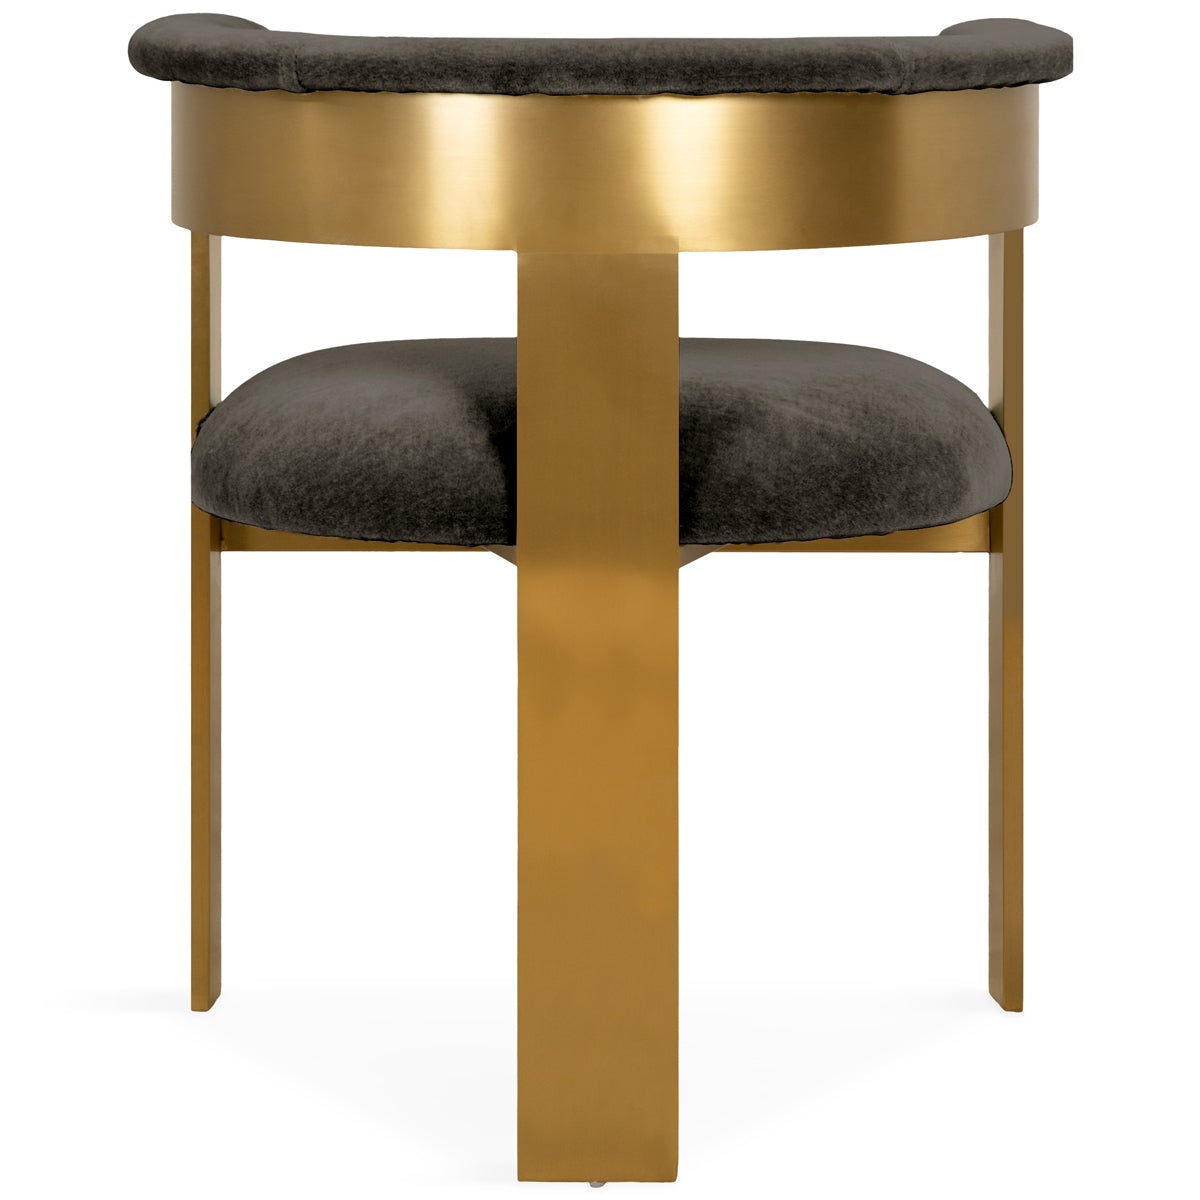 Marseille Dining Chair in Mohair - ModShop1.com